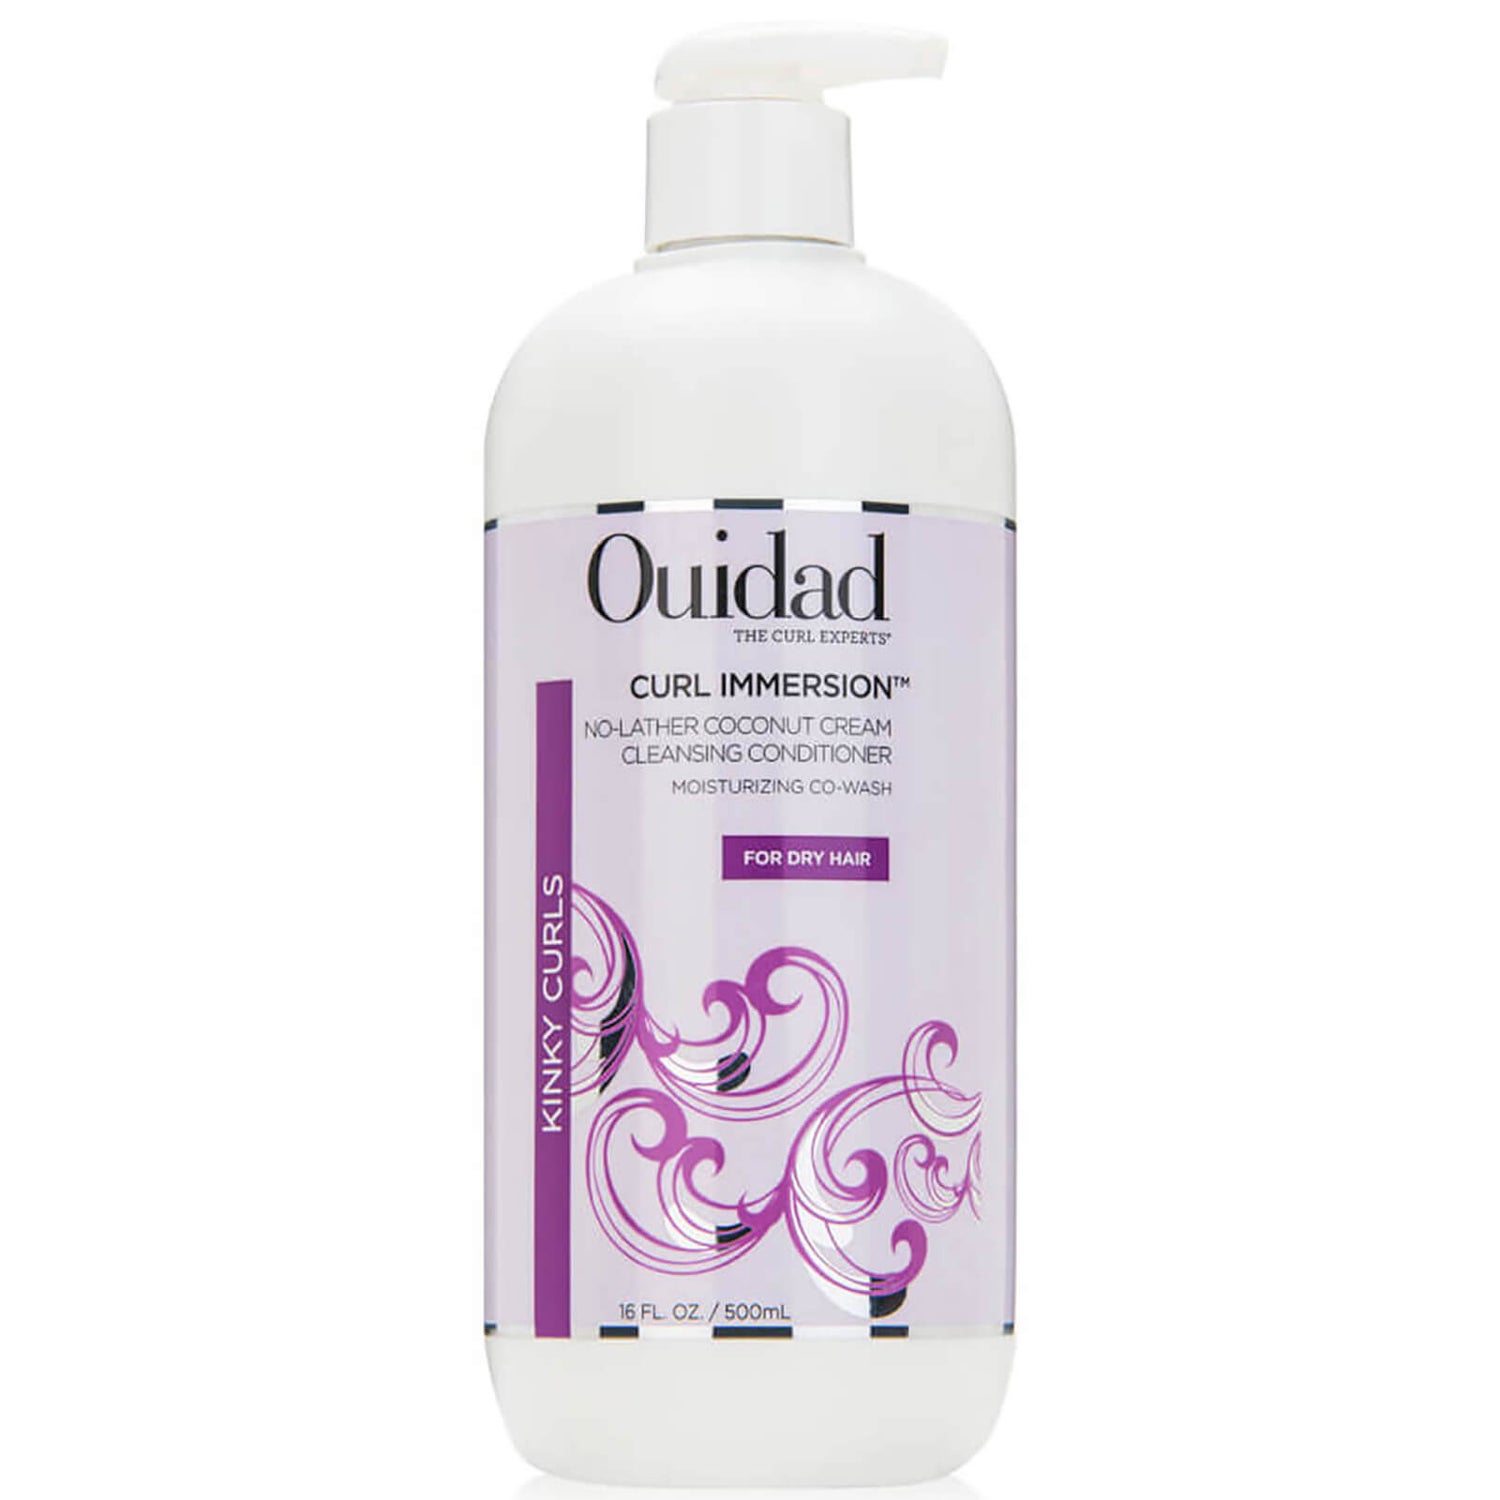 Ouidad Curl Immersion No-Lather Coconut Cleansing Conditioner (16 oz.)